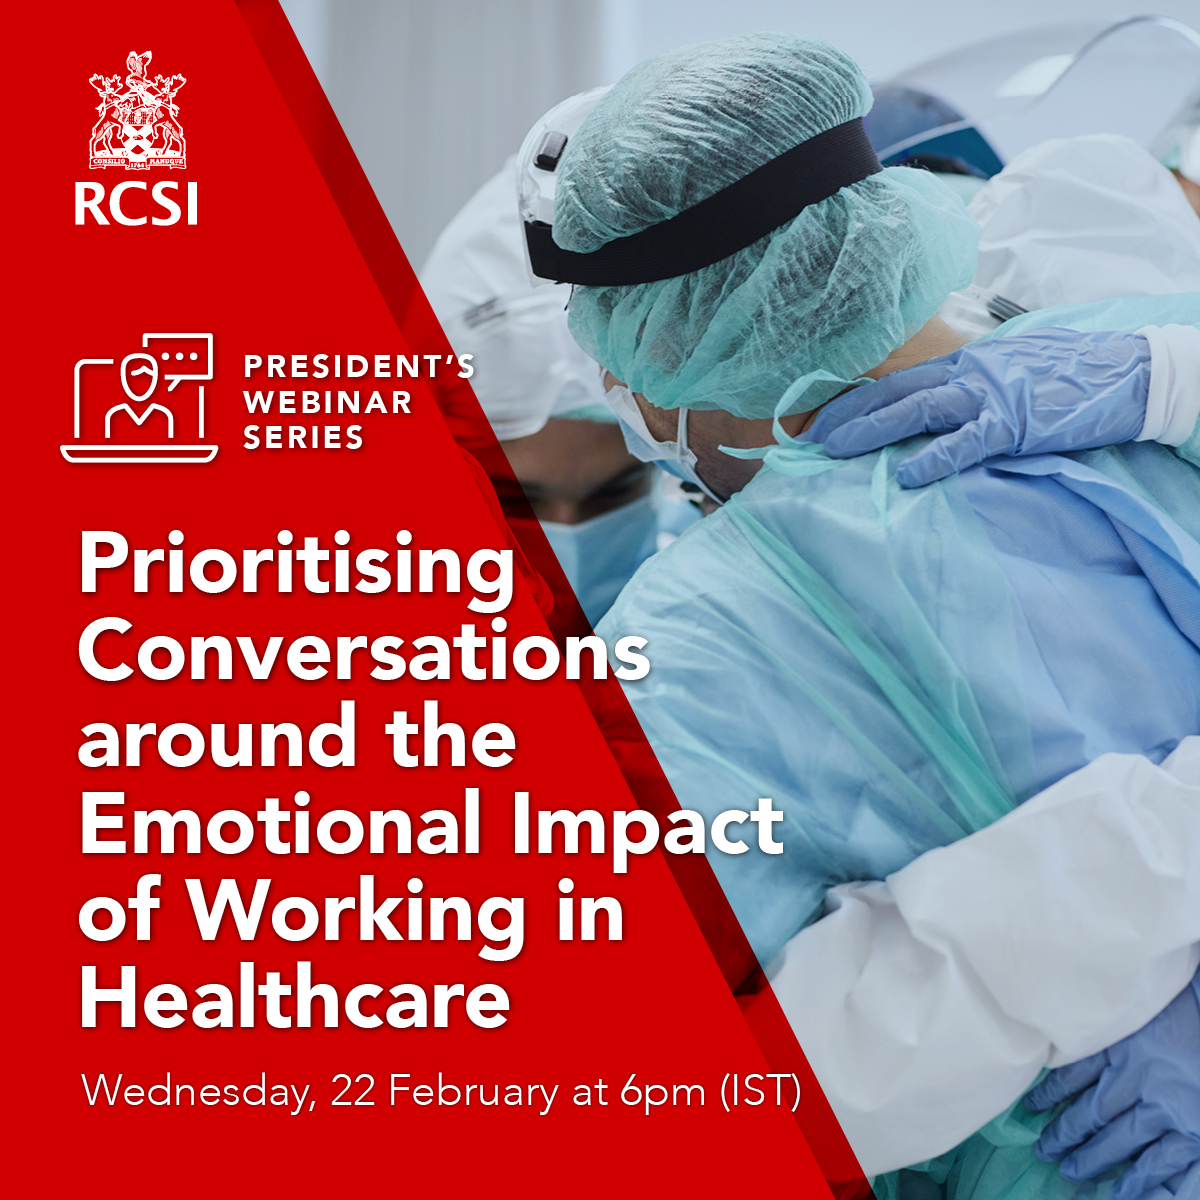 RCSI President Professor Laura Viani and members of RCSI Council are delighted to host a series of 'Surgical Matters' webinars covering a diverse range of topics of relevance to Fellows and Members. Details found here: bit.ly/3KlbNGO